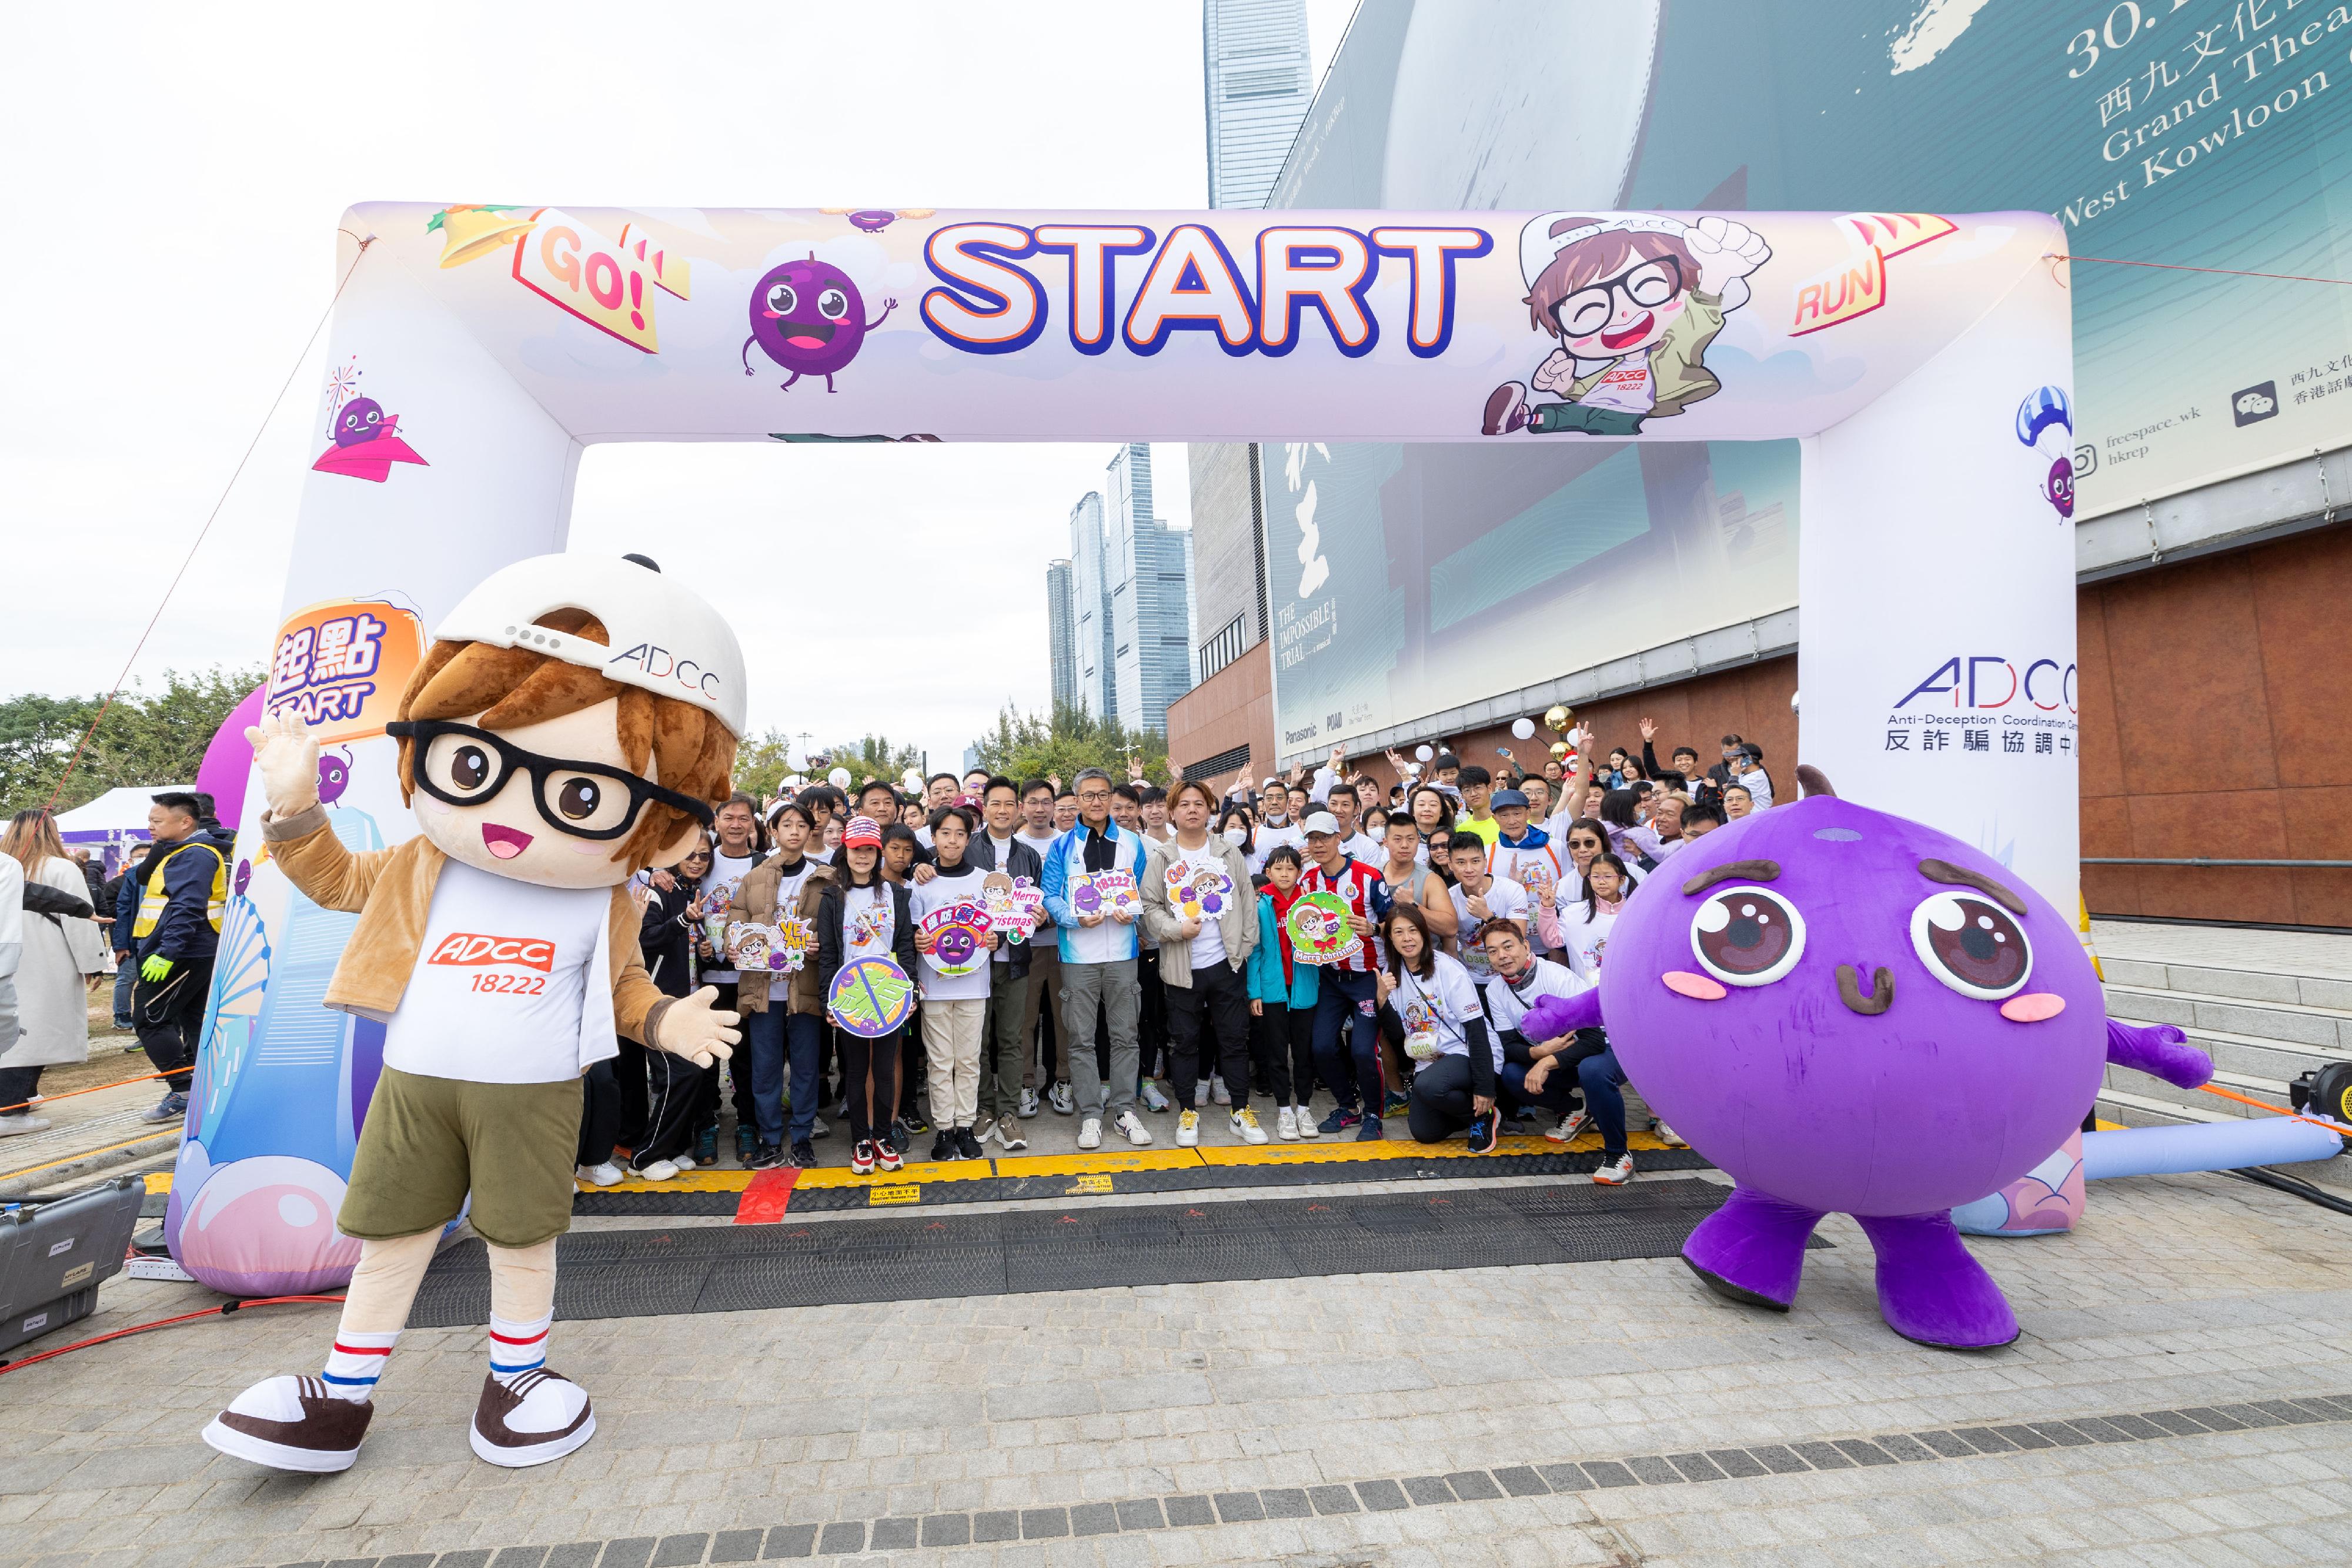 The Anti-Deception Coordination Centre of the Hong Kong Police Force organises the "West Kowloon CHILL RUN Winter Market cum Anti-Scam Charity Run 2023" at the West Kowloon Cultural District today (December 17). Photo shows the Commissioner of Police, Mr Siu Chak-yee (front row, centre) attending the event, promoting the public awareness of scam prevention with other runners.